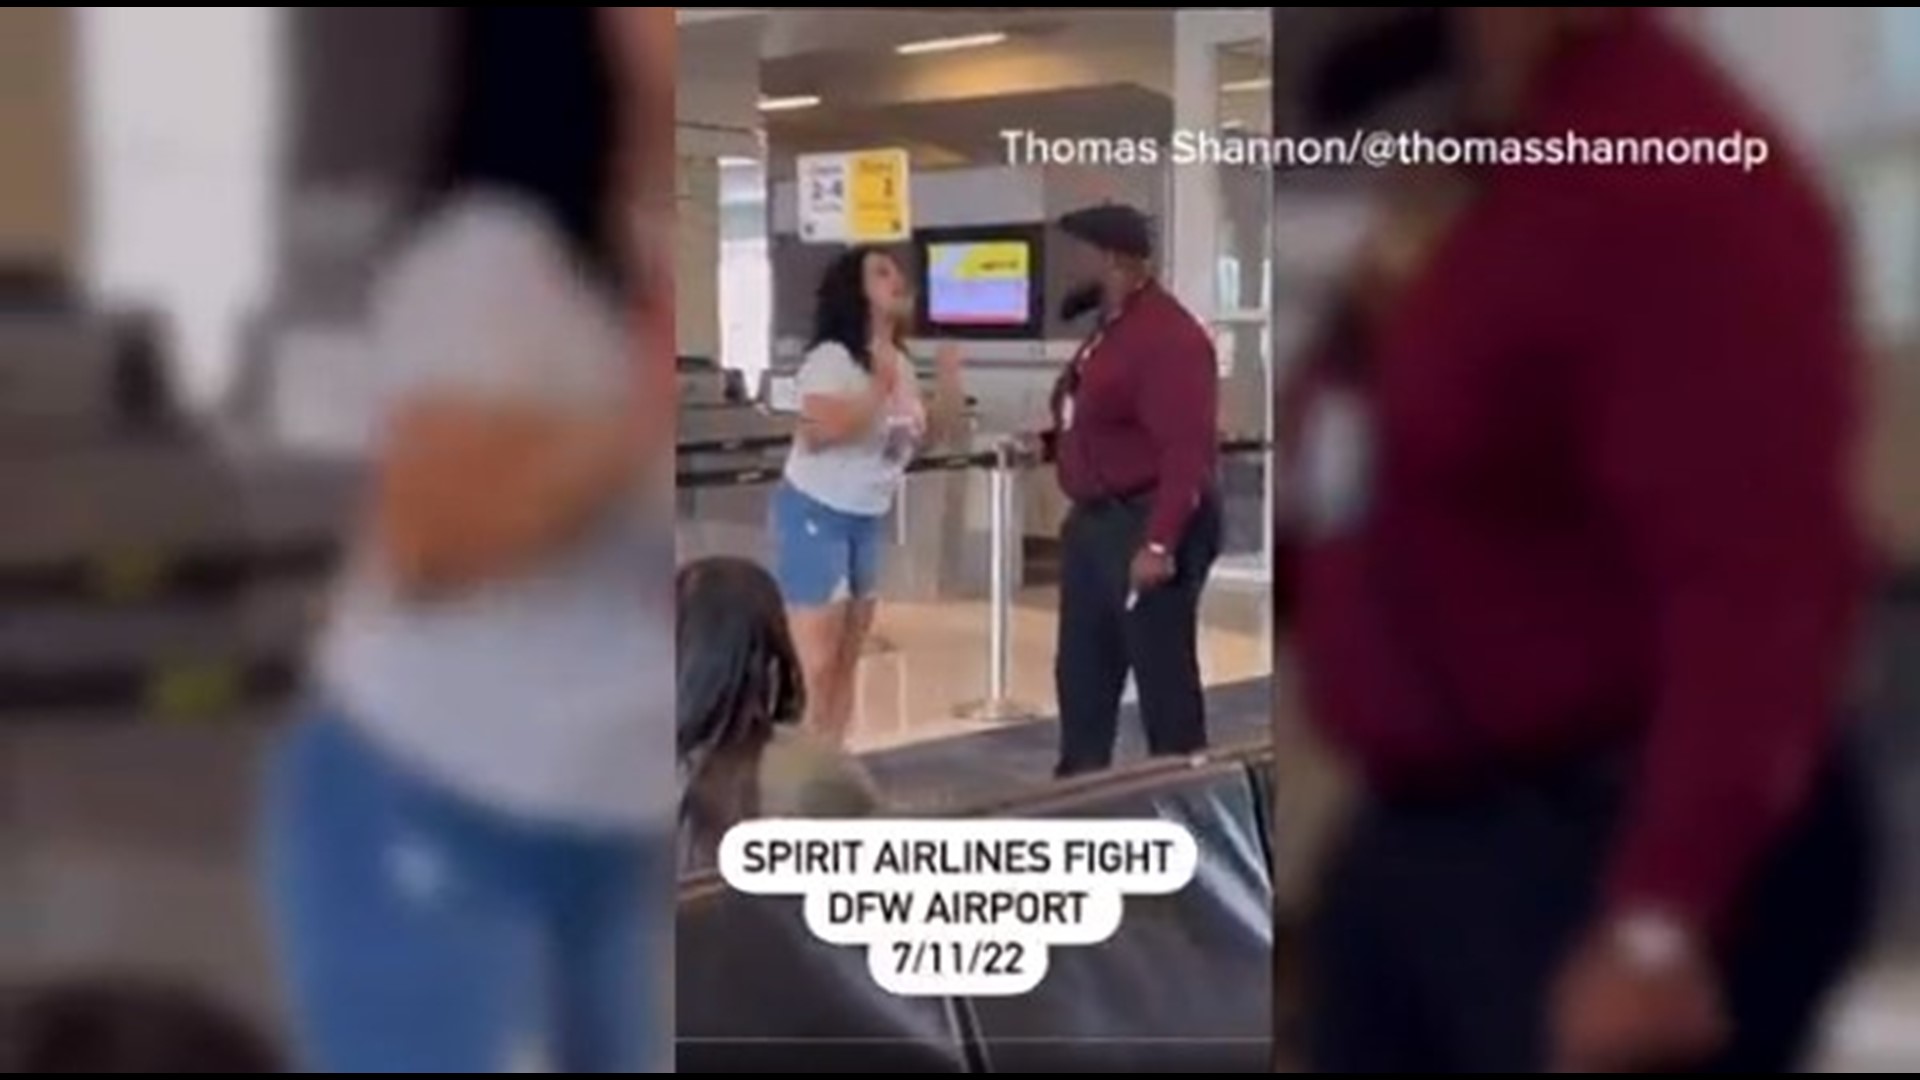 The airline and airport told WFAA it was aware of the incident and does not tolerate violence of any kind. They added that they are working with law enforcement.